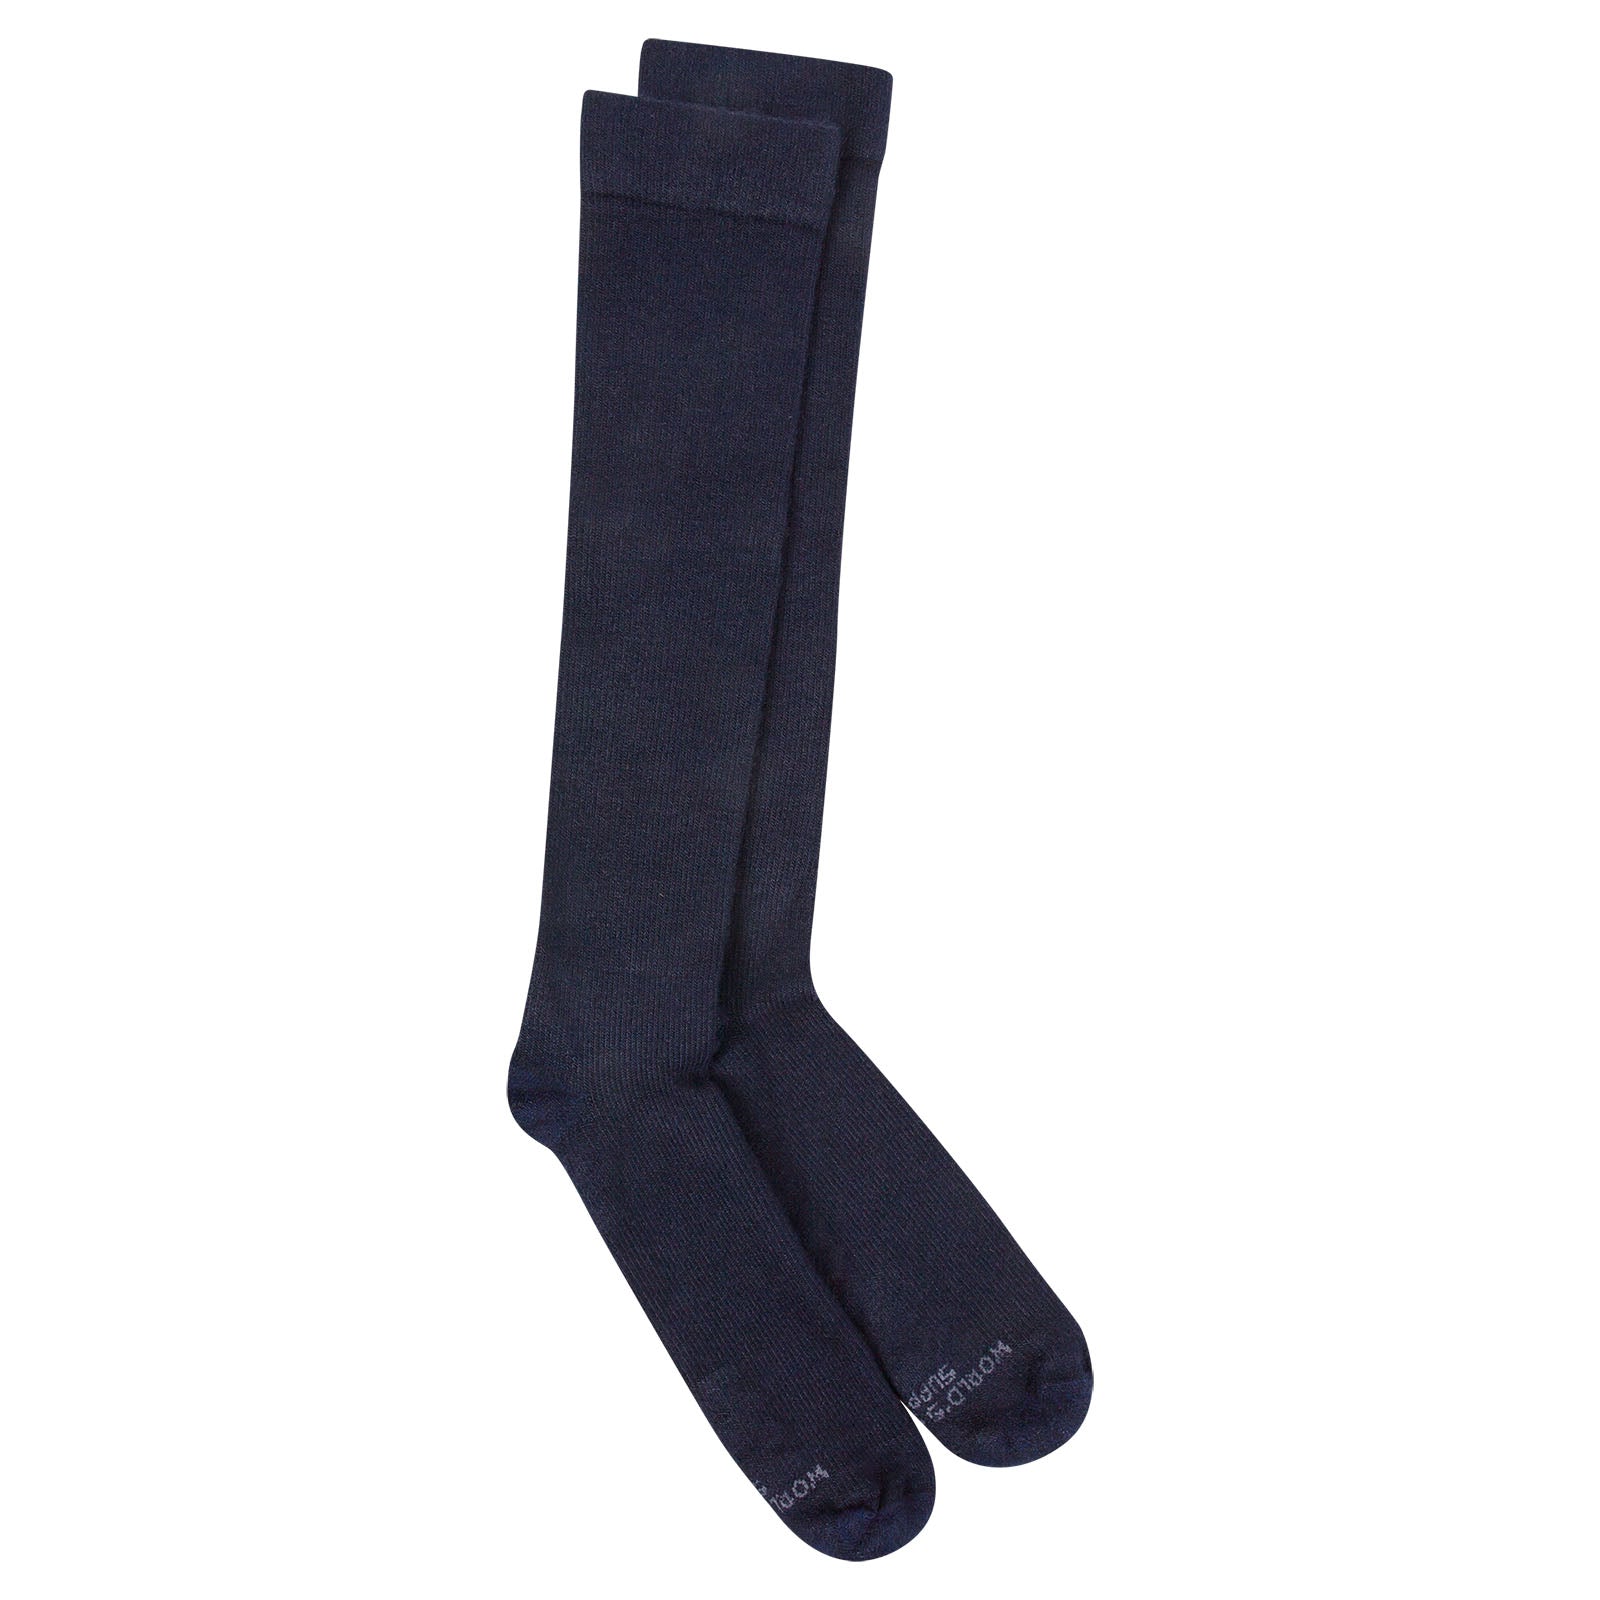 Sensitive Support Fit Fashion Knee-high Navy